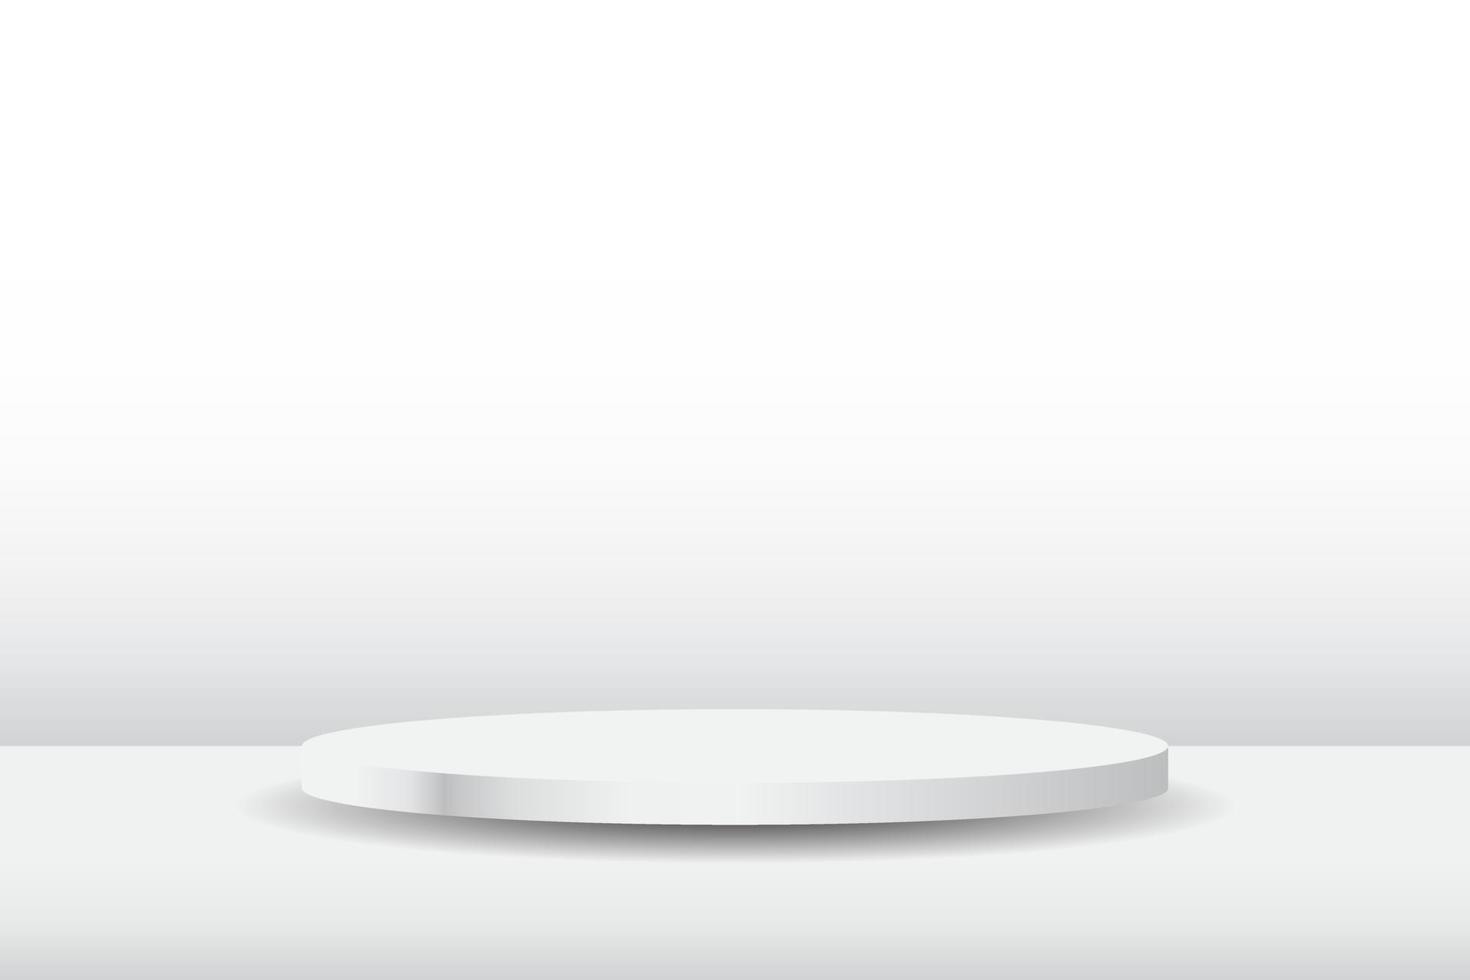 Empty circular pedestal. White circular awarded the winner's podium for outstanding advertising display of luxury goods on a white gradient lighting background vector